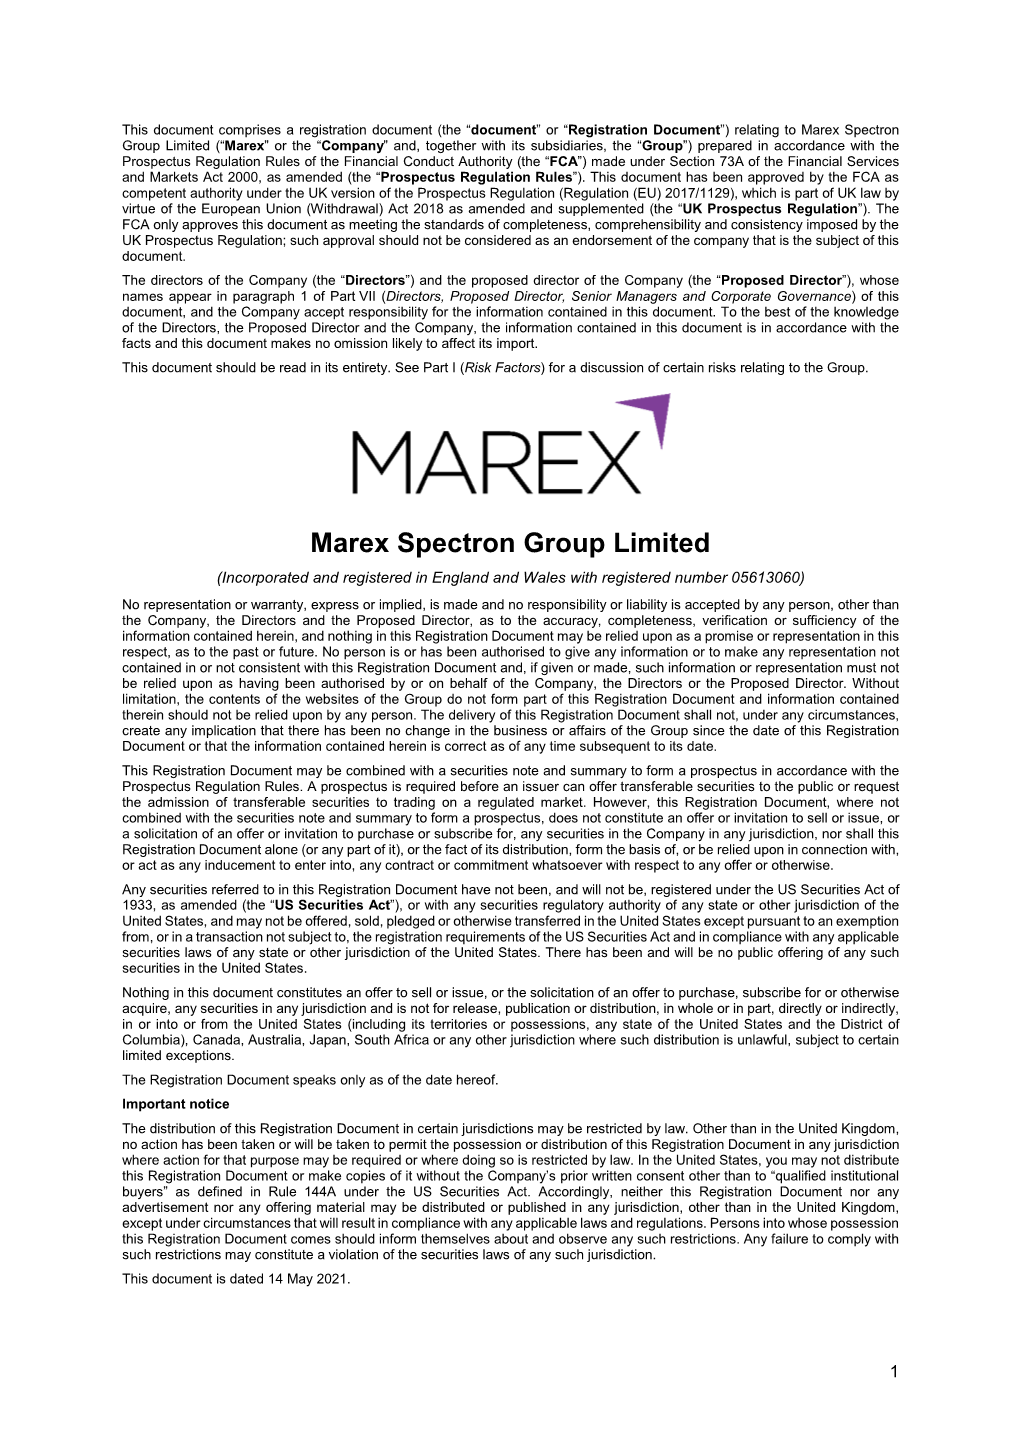 Marex Spectron Group Limited